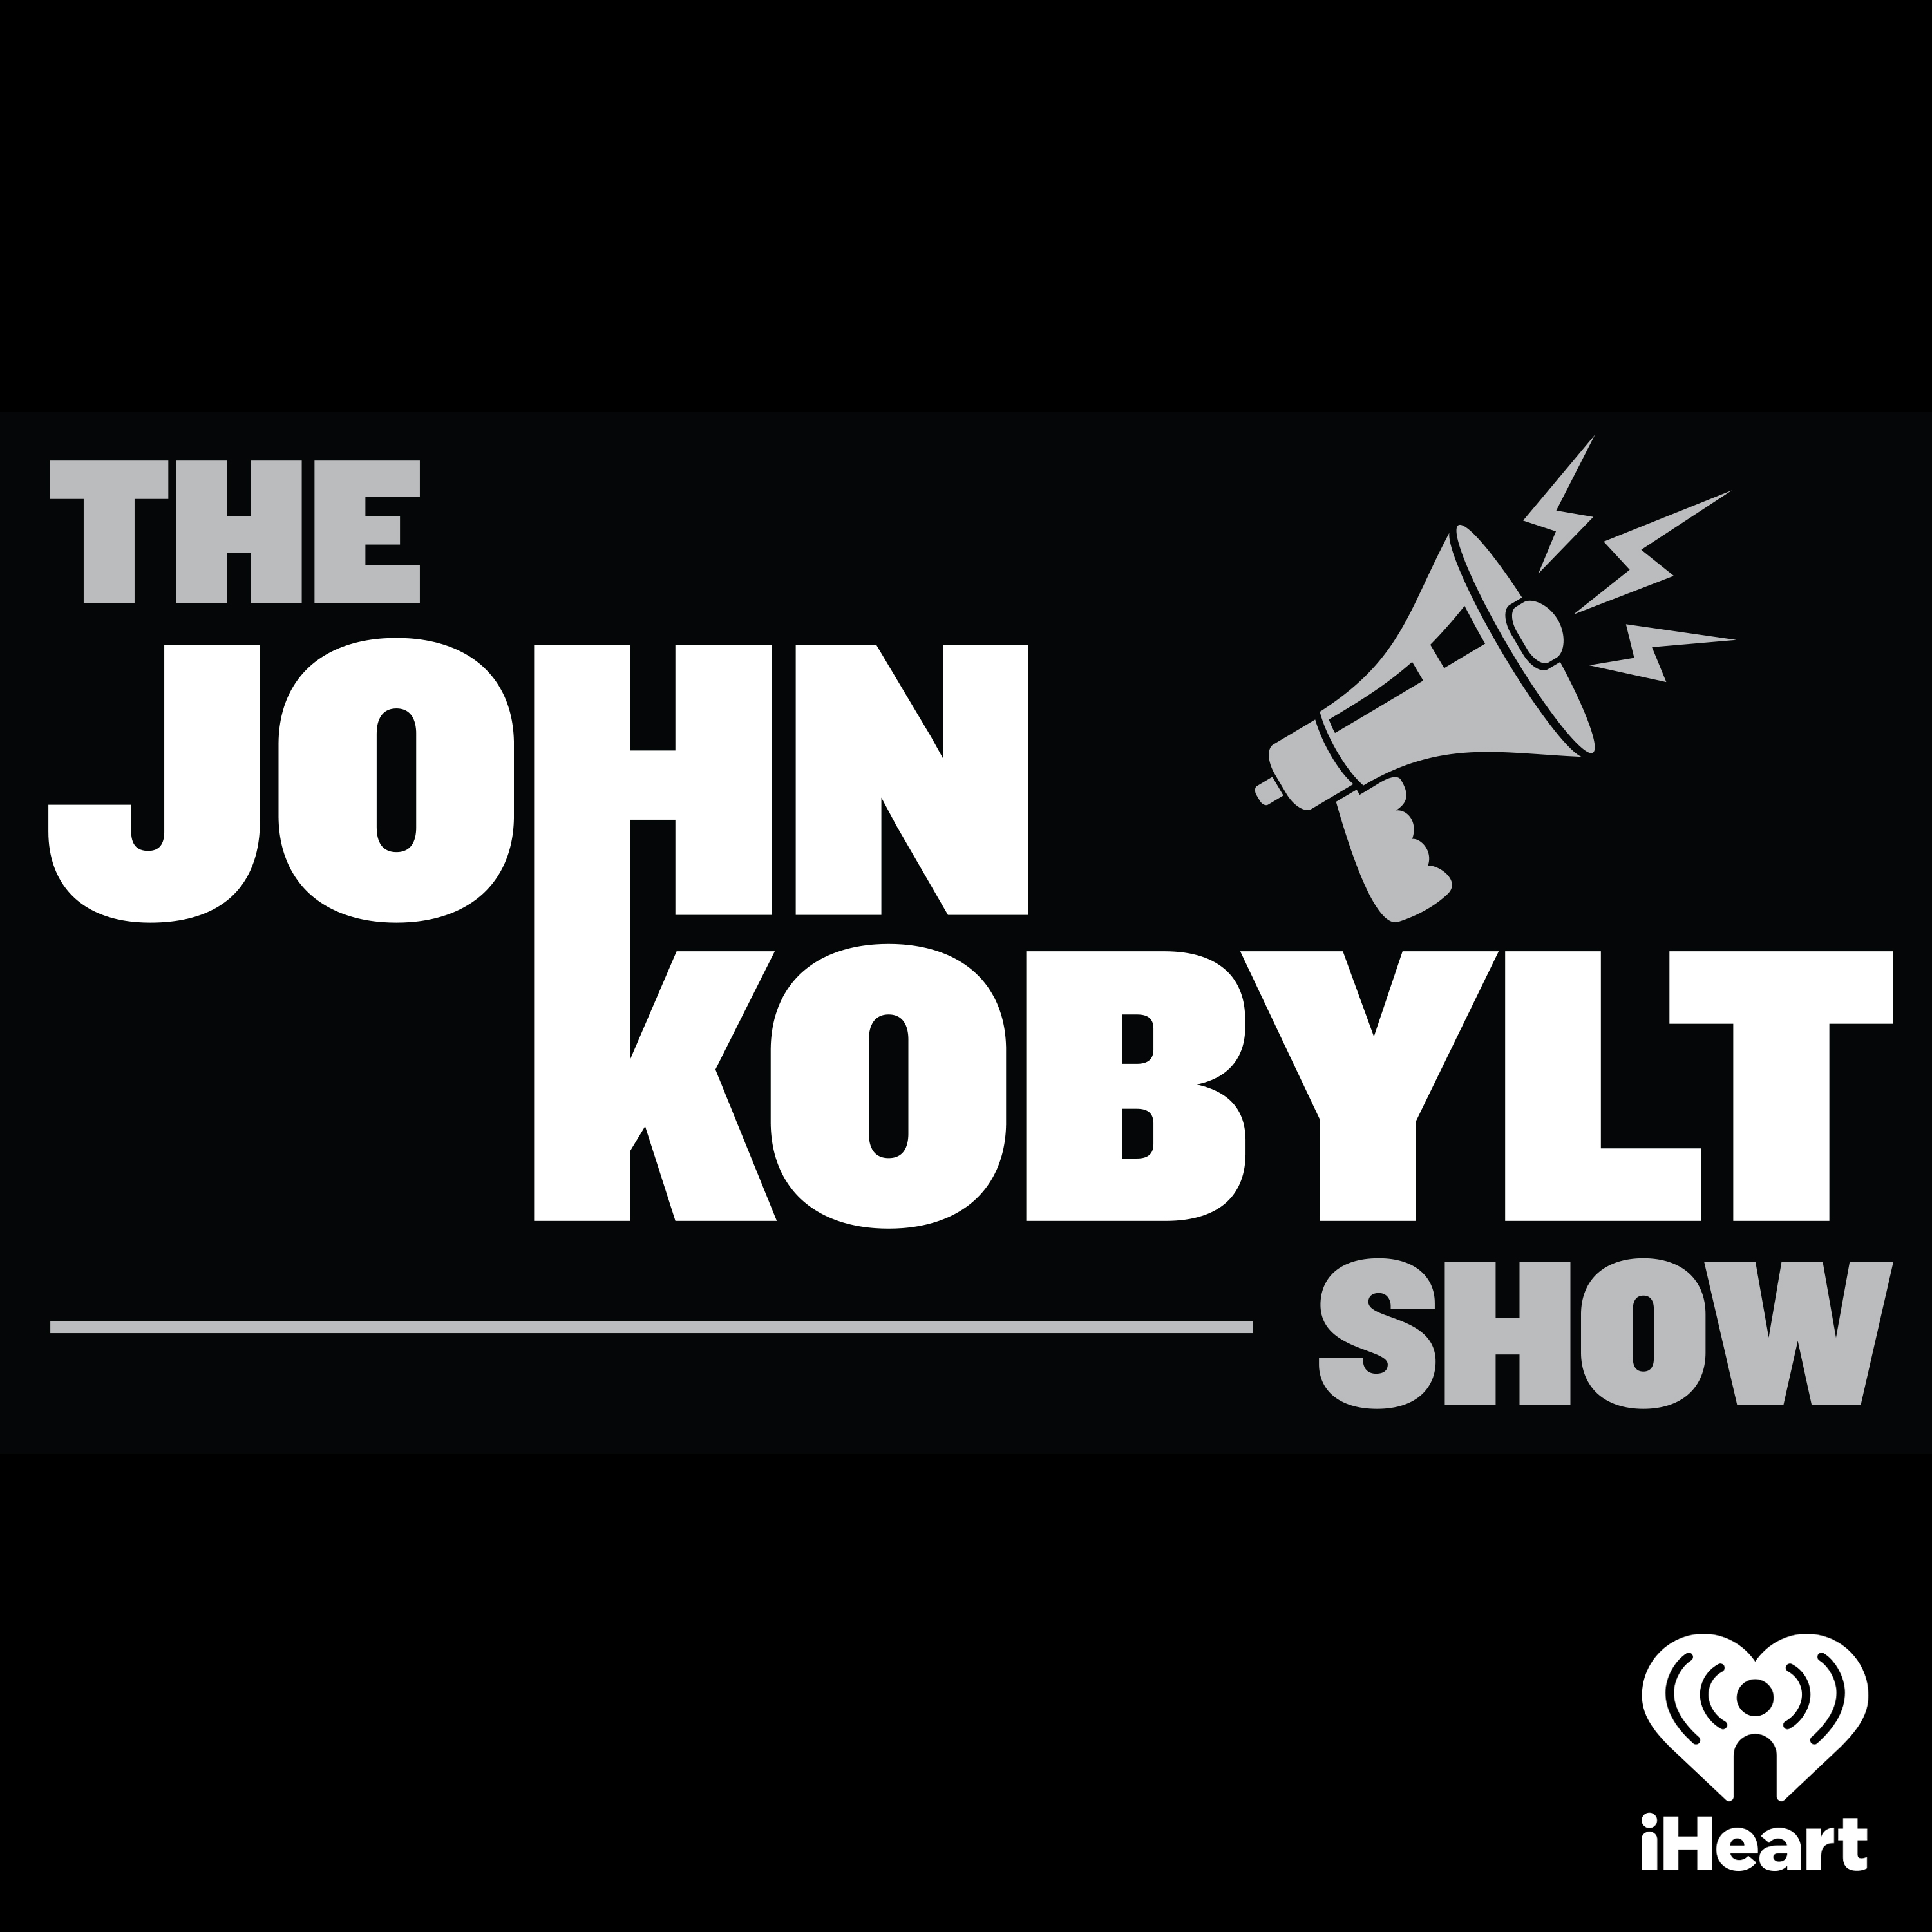 The John Kobylt Show Hour 1 (07/08) - Questions about Biden's Mental Capacity